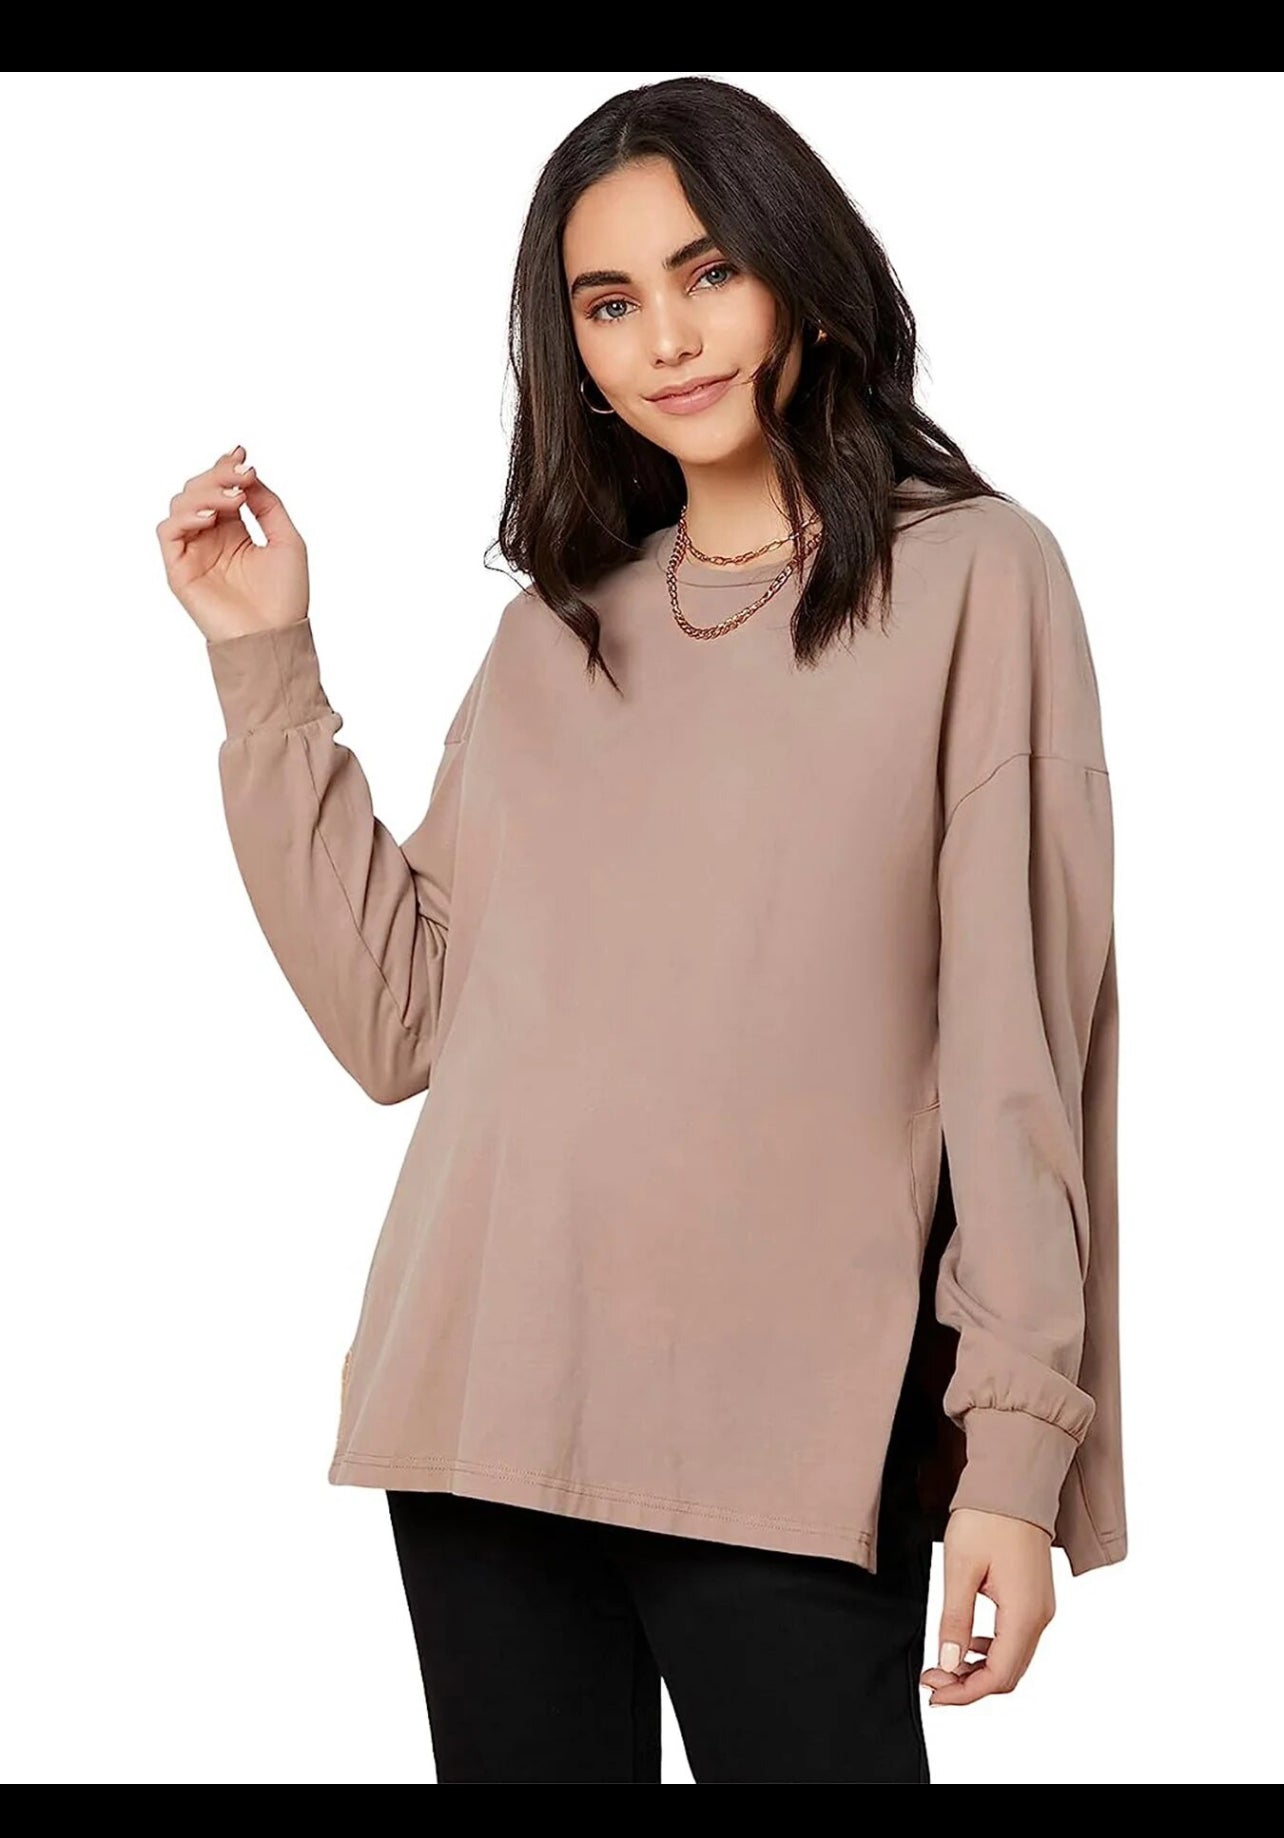 Women's Maternity T-Shirt Long Sleeve Split Side Pregnancy Tee Tops maternity shirts  workout tops  for wor